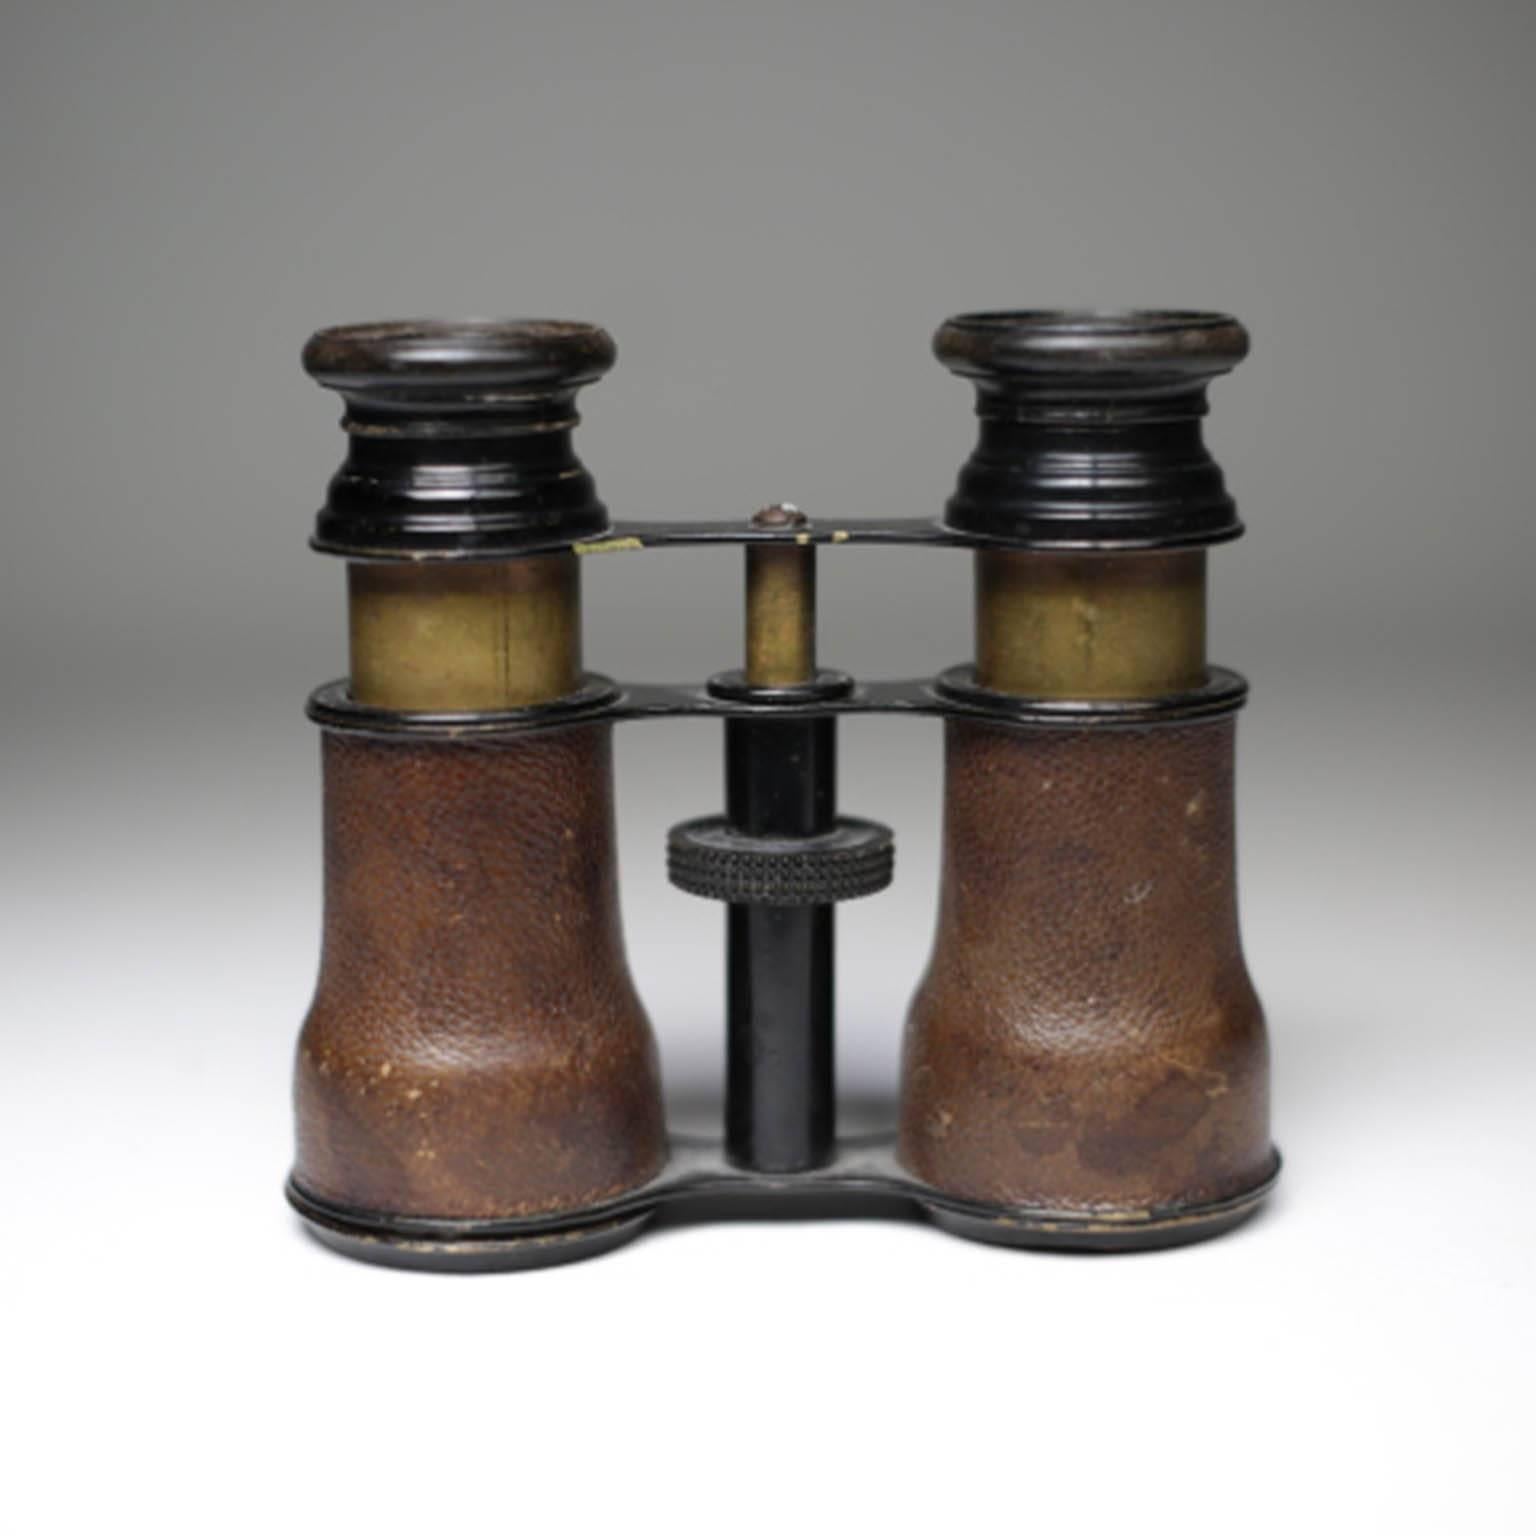 Victorian Antique Shark Skin Wrapped Opera Glasses and Leather Case, circa 1800s